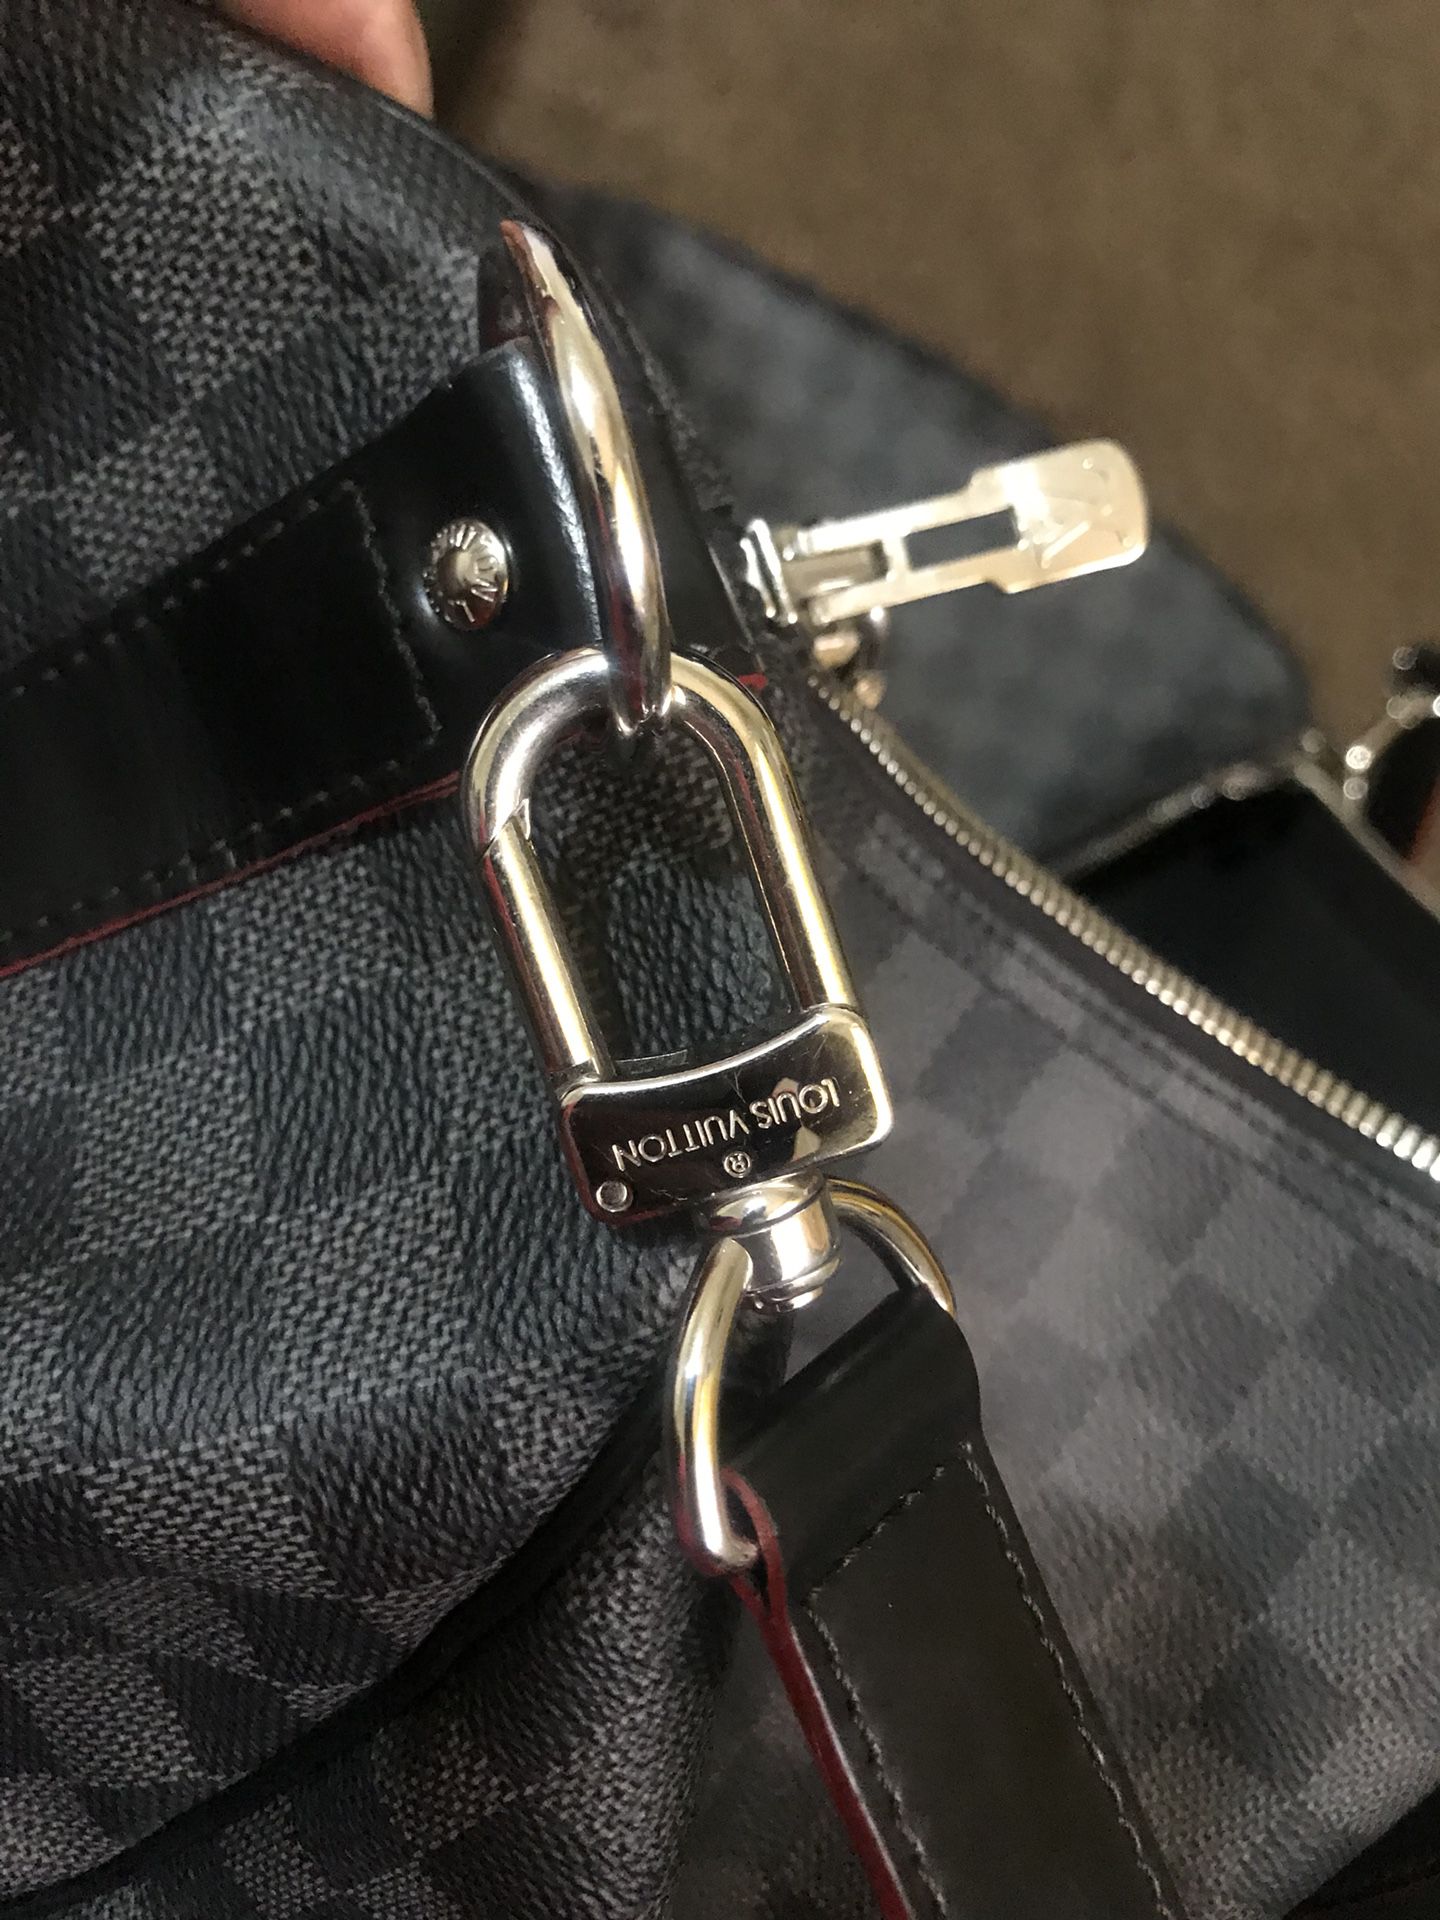 Louis Vuitton Saumur Backpack for Sale in Tempe, AZ - OfferUp